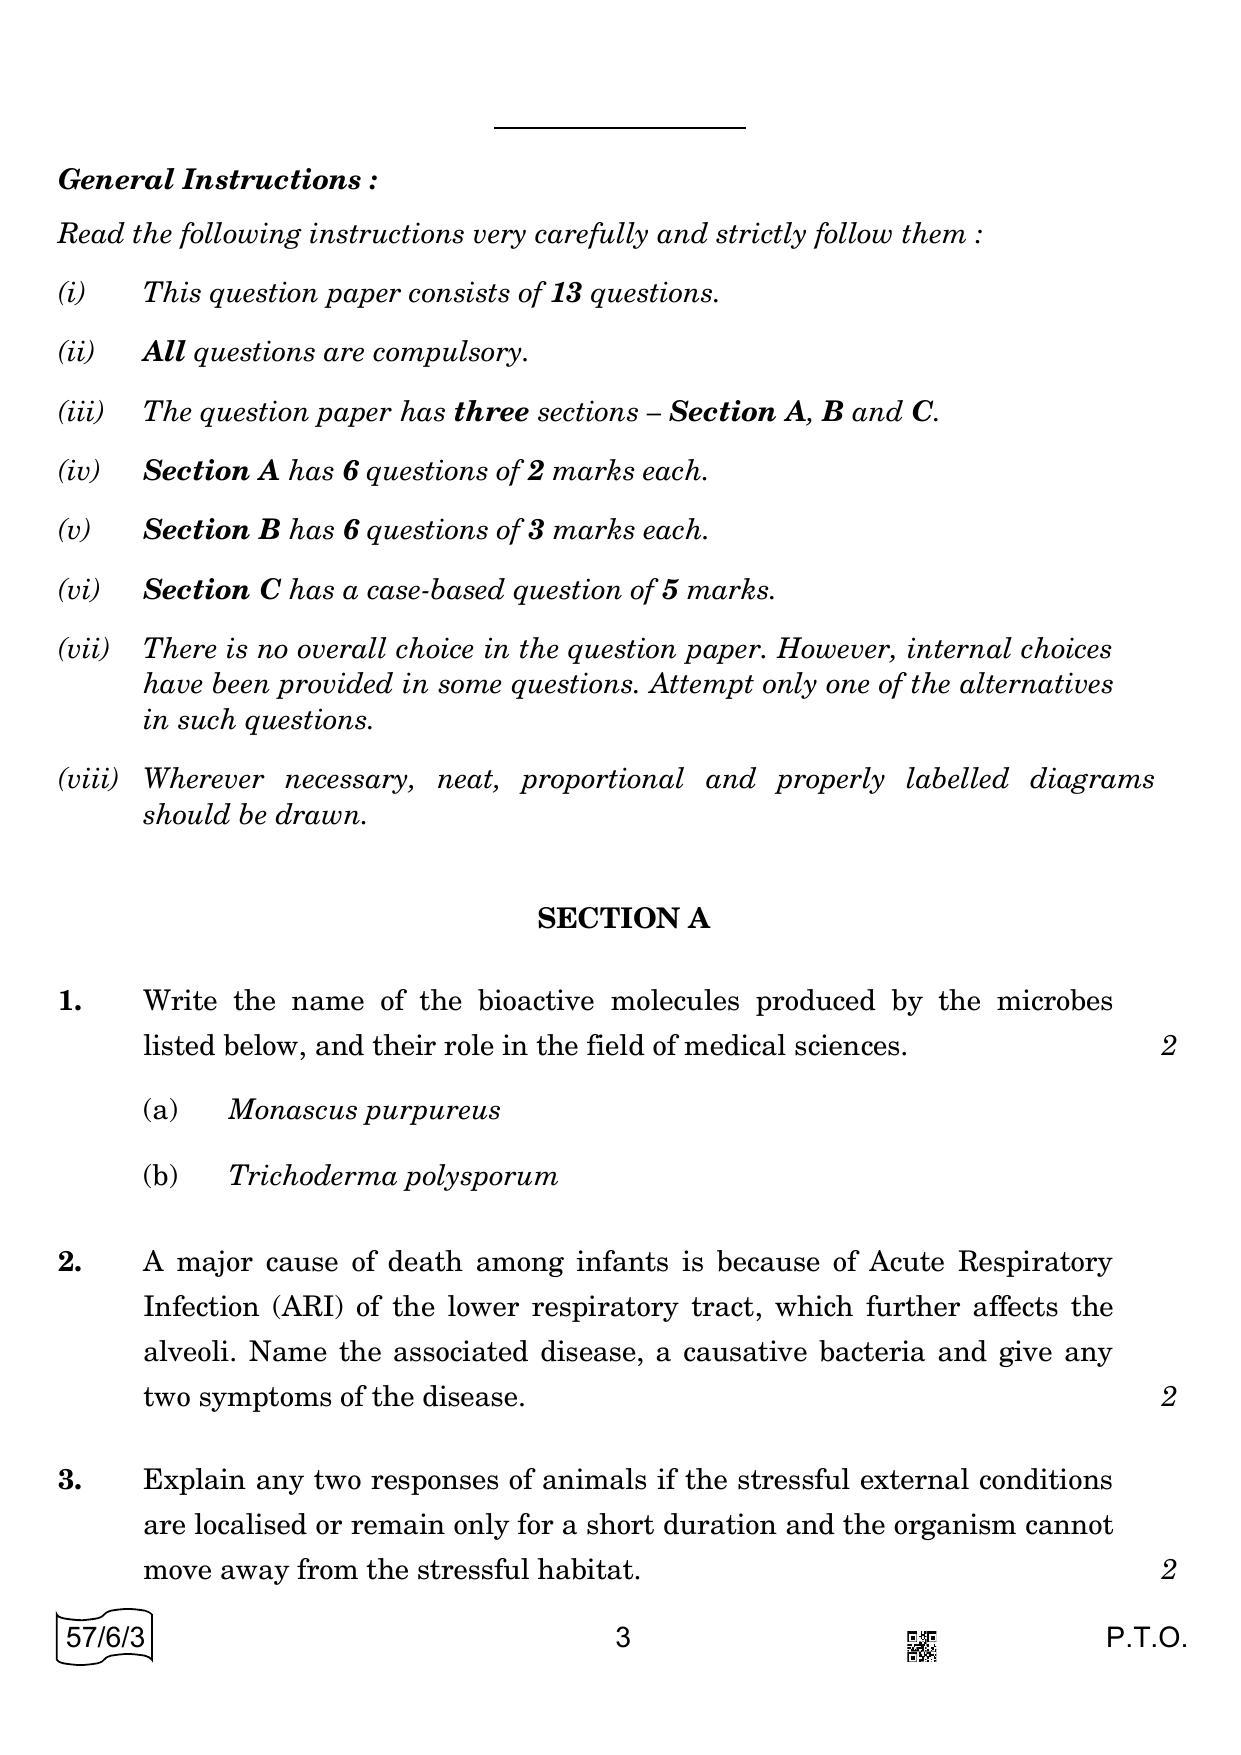 CBSE Class 12 57-6-3 BIOLOGY 2022 Compartment Question Paper - Page 3